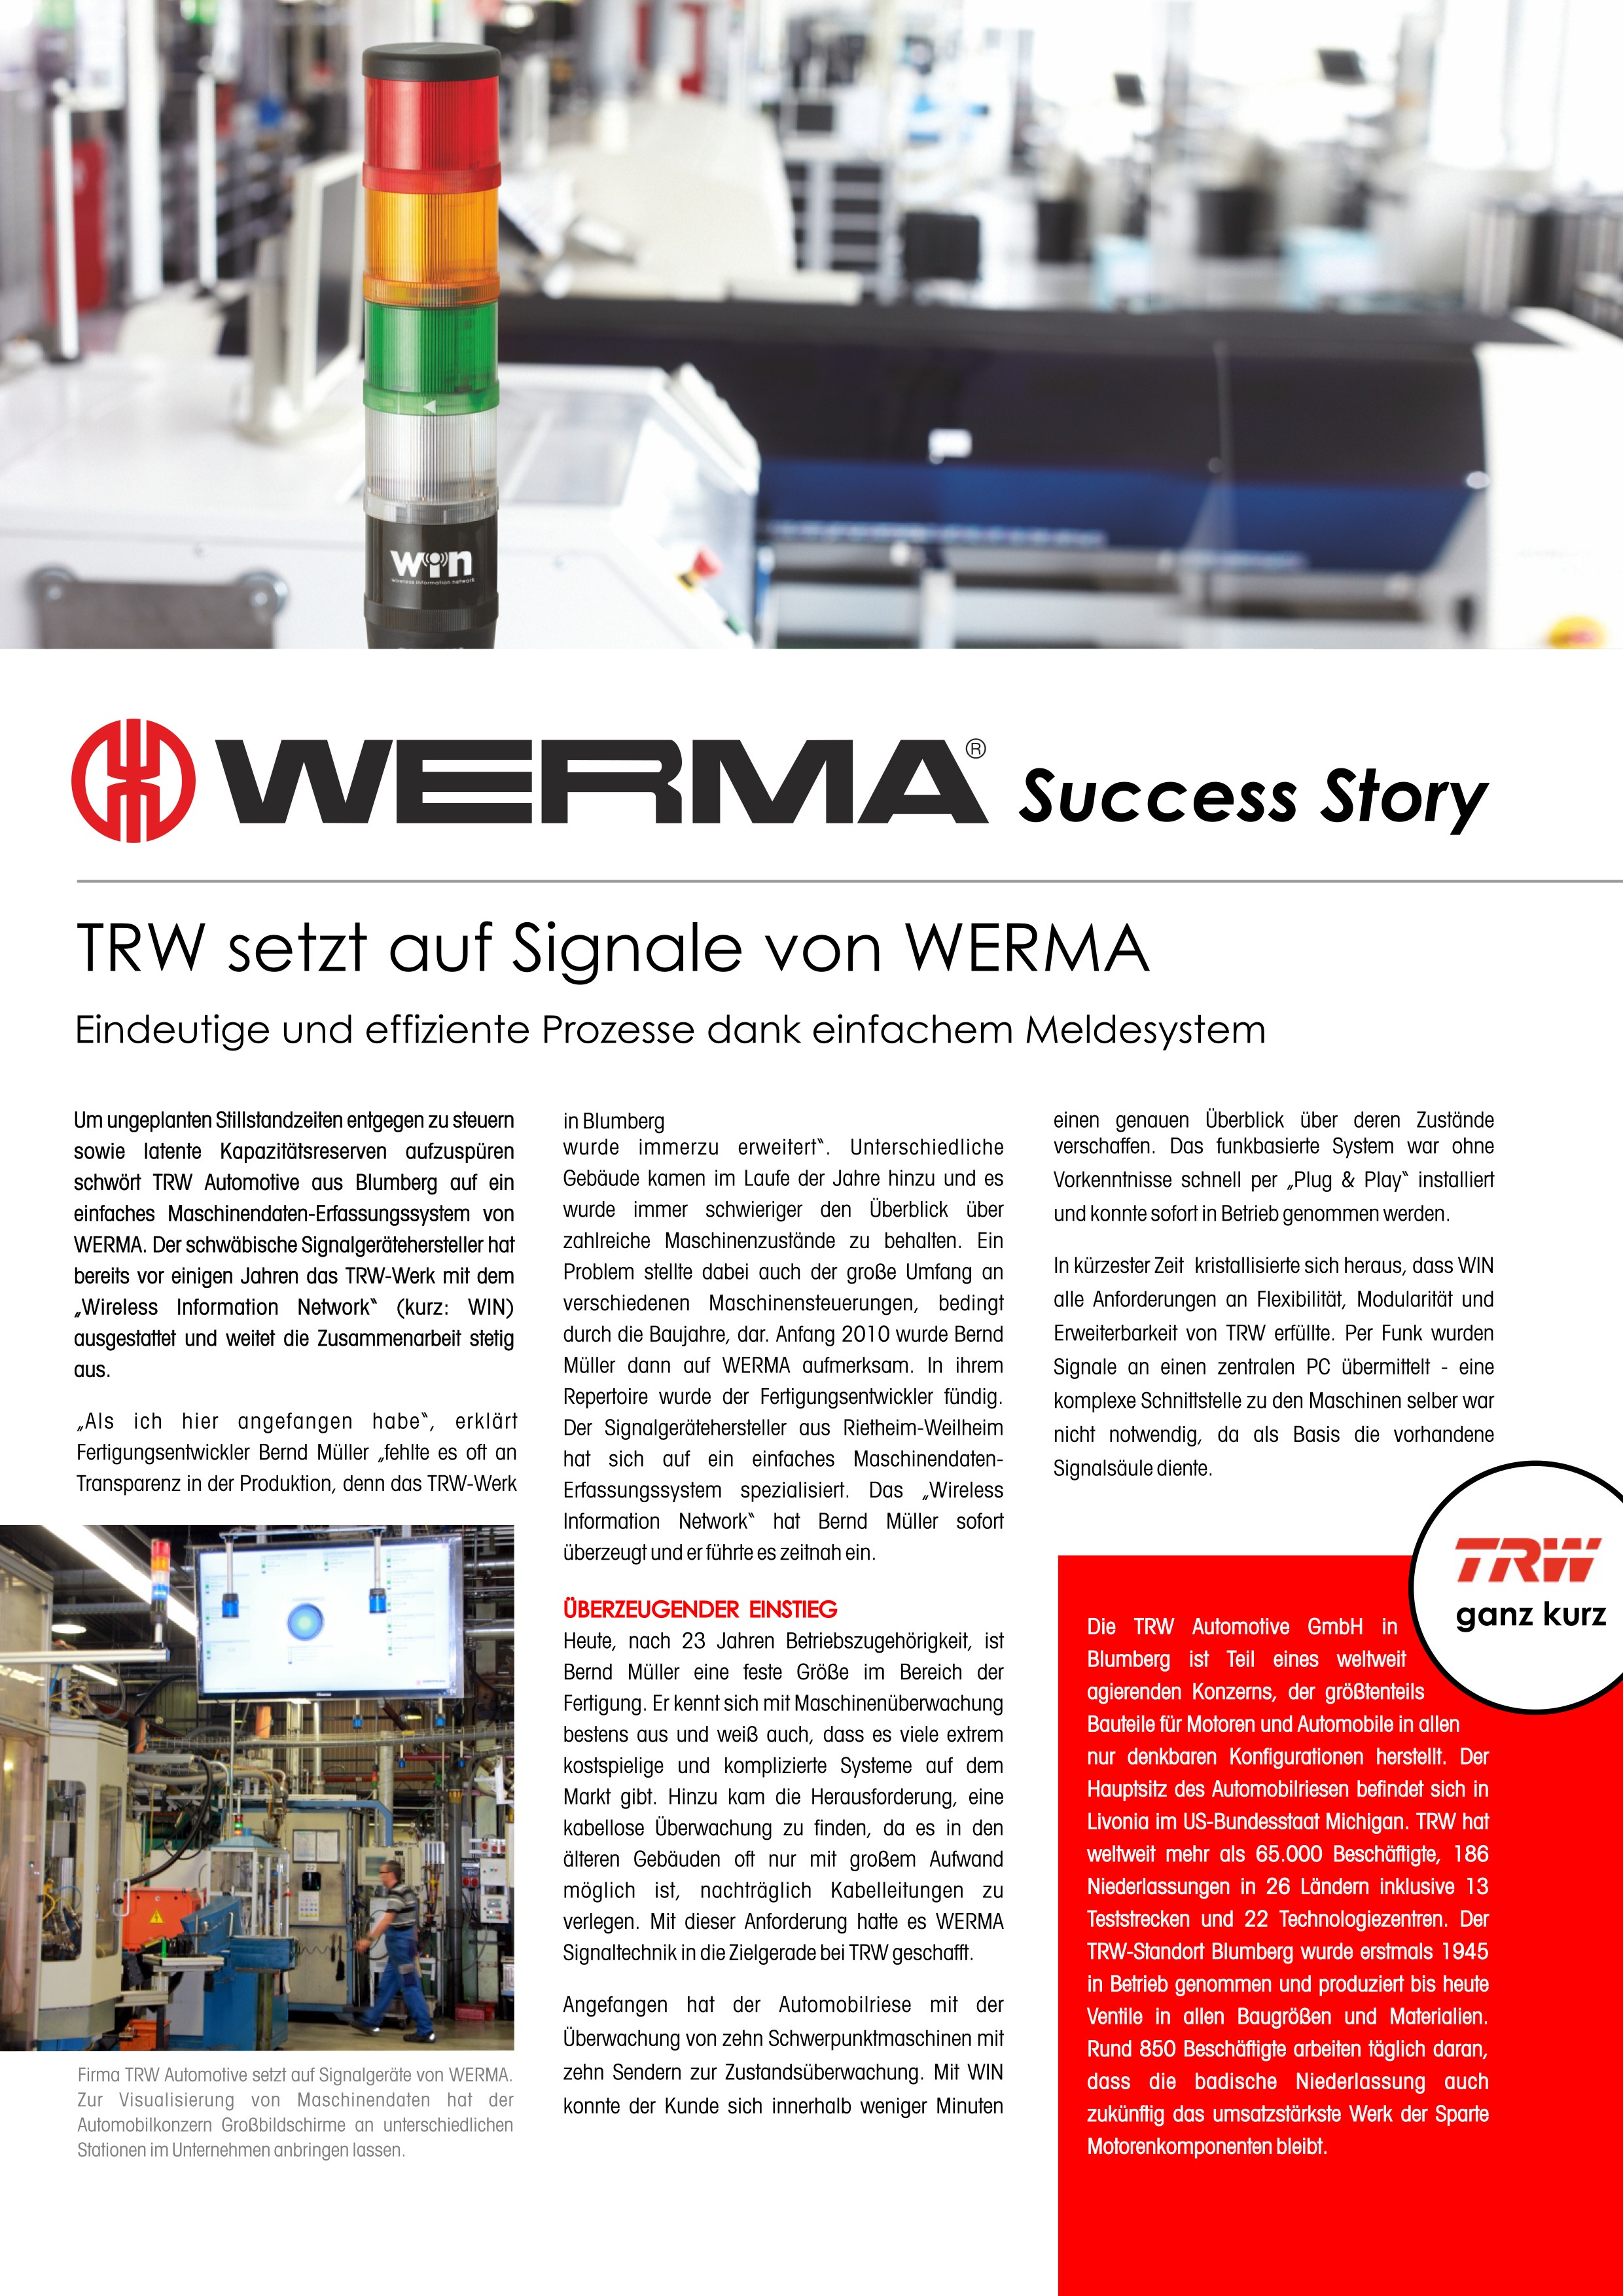 TRW - TRW calls for action with the help of WERMA <i>(english only)</i>